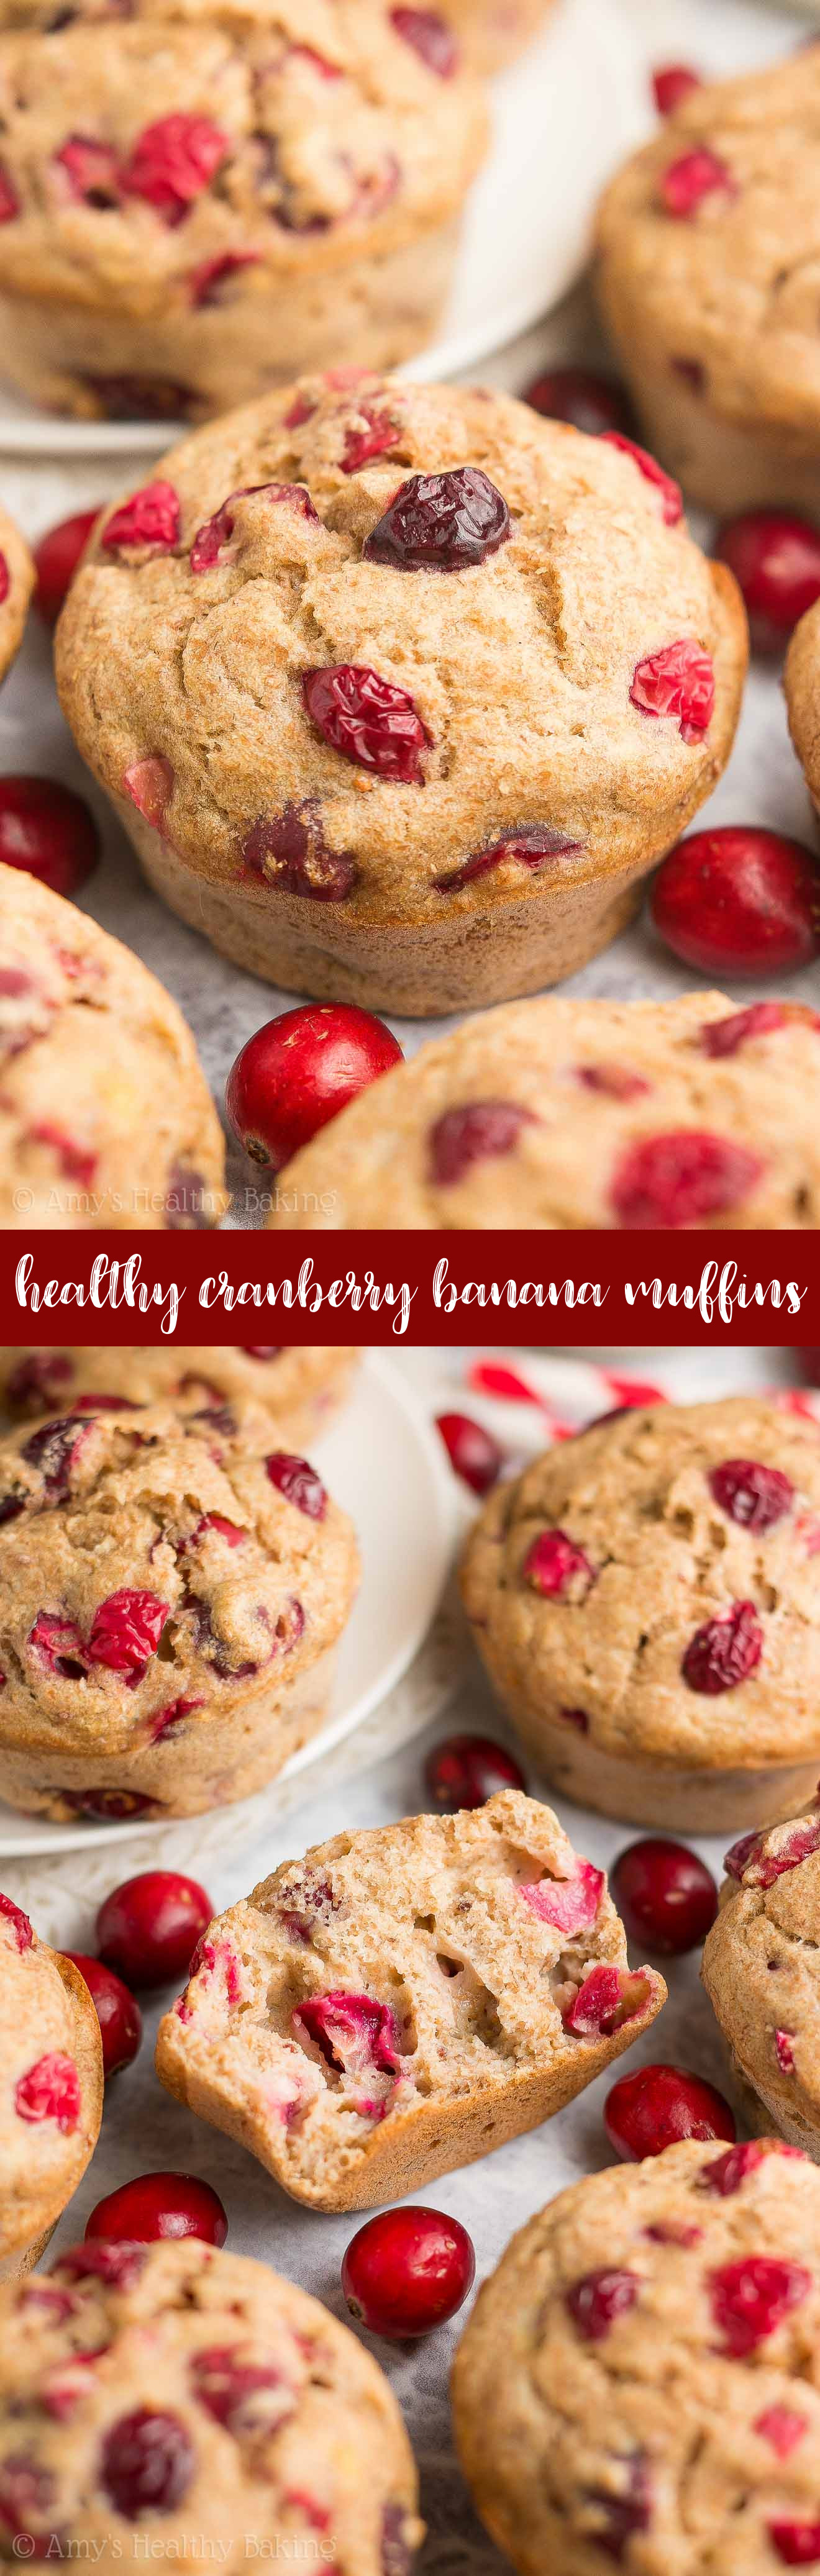 Healthy Cranberry Recipes
 Healthy Cranberry Banana Muffins